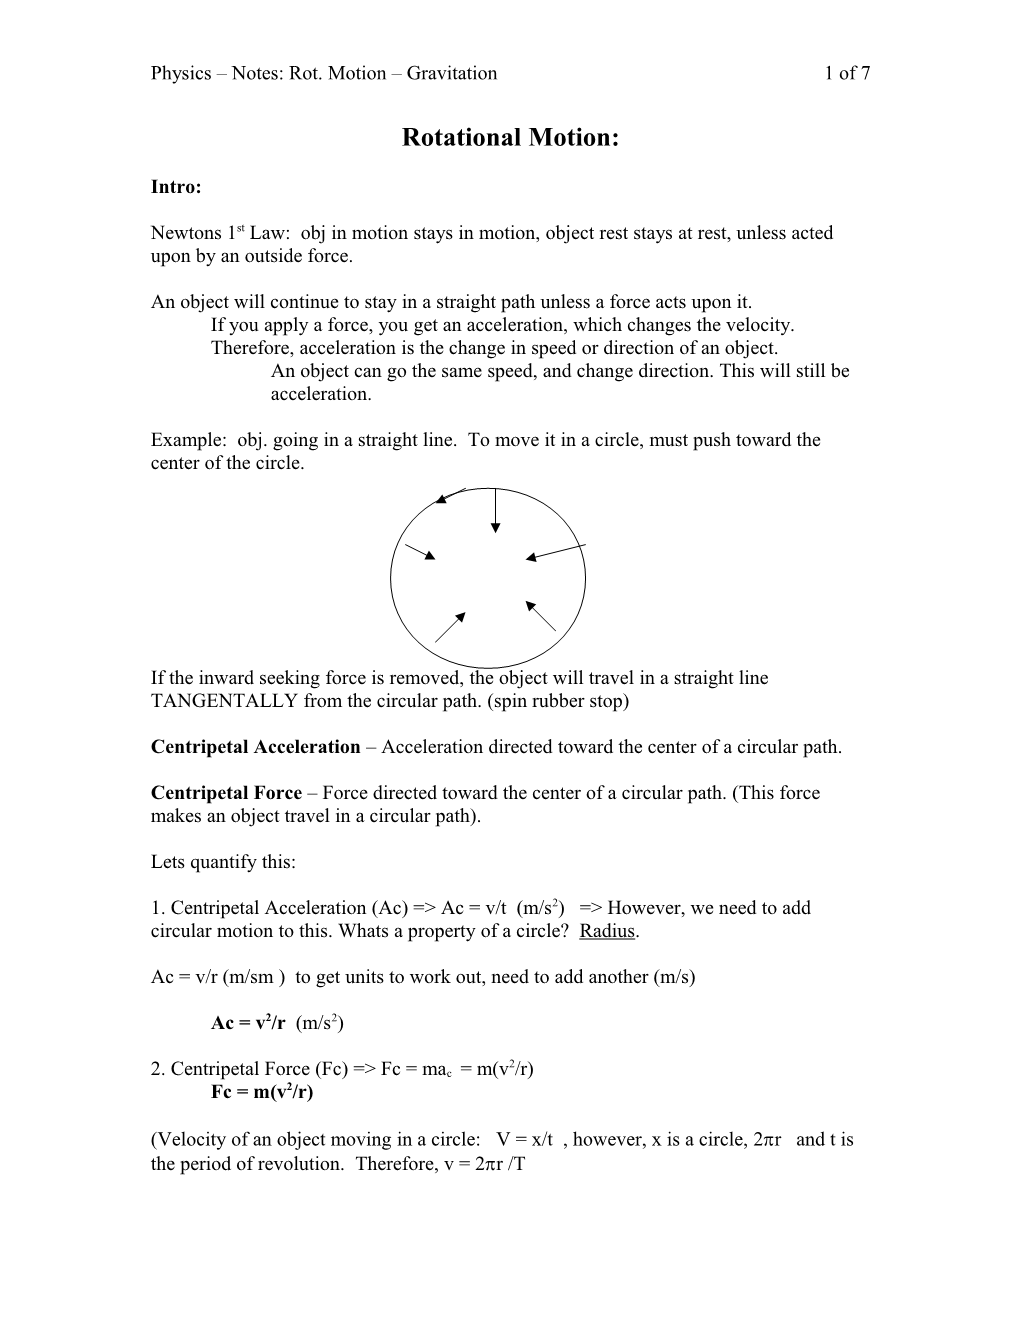 Physics Notes: Rot. Motion Gravitation1 of 7